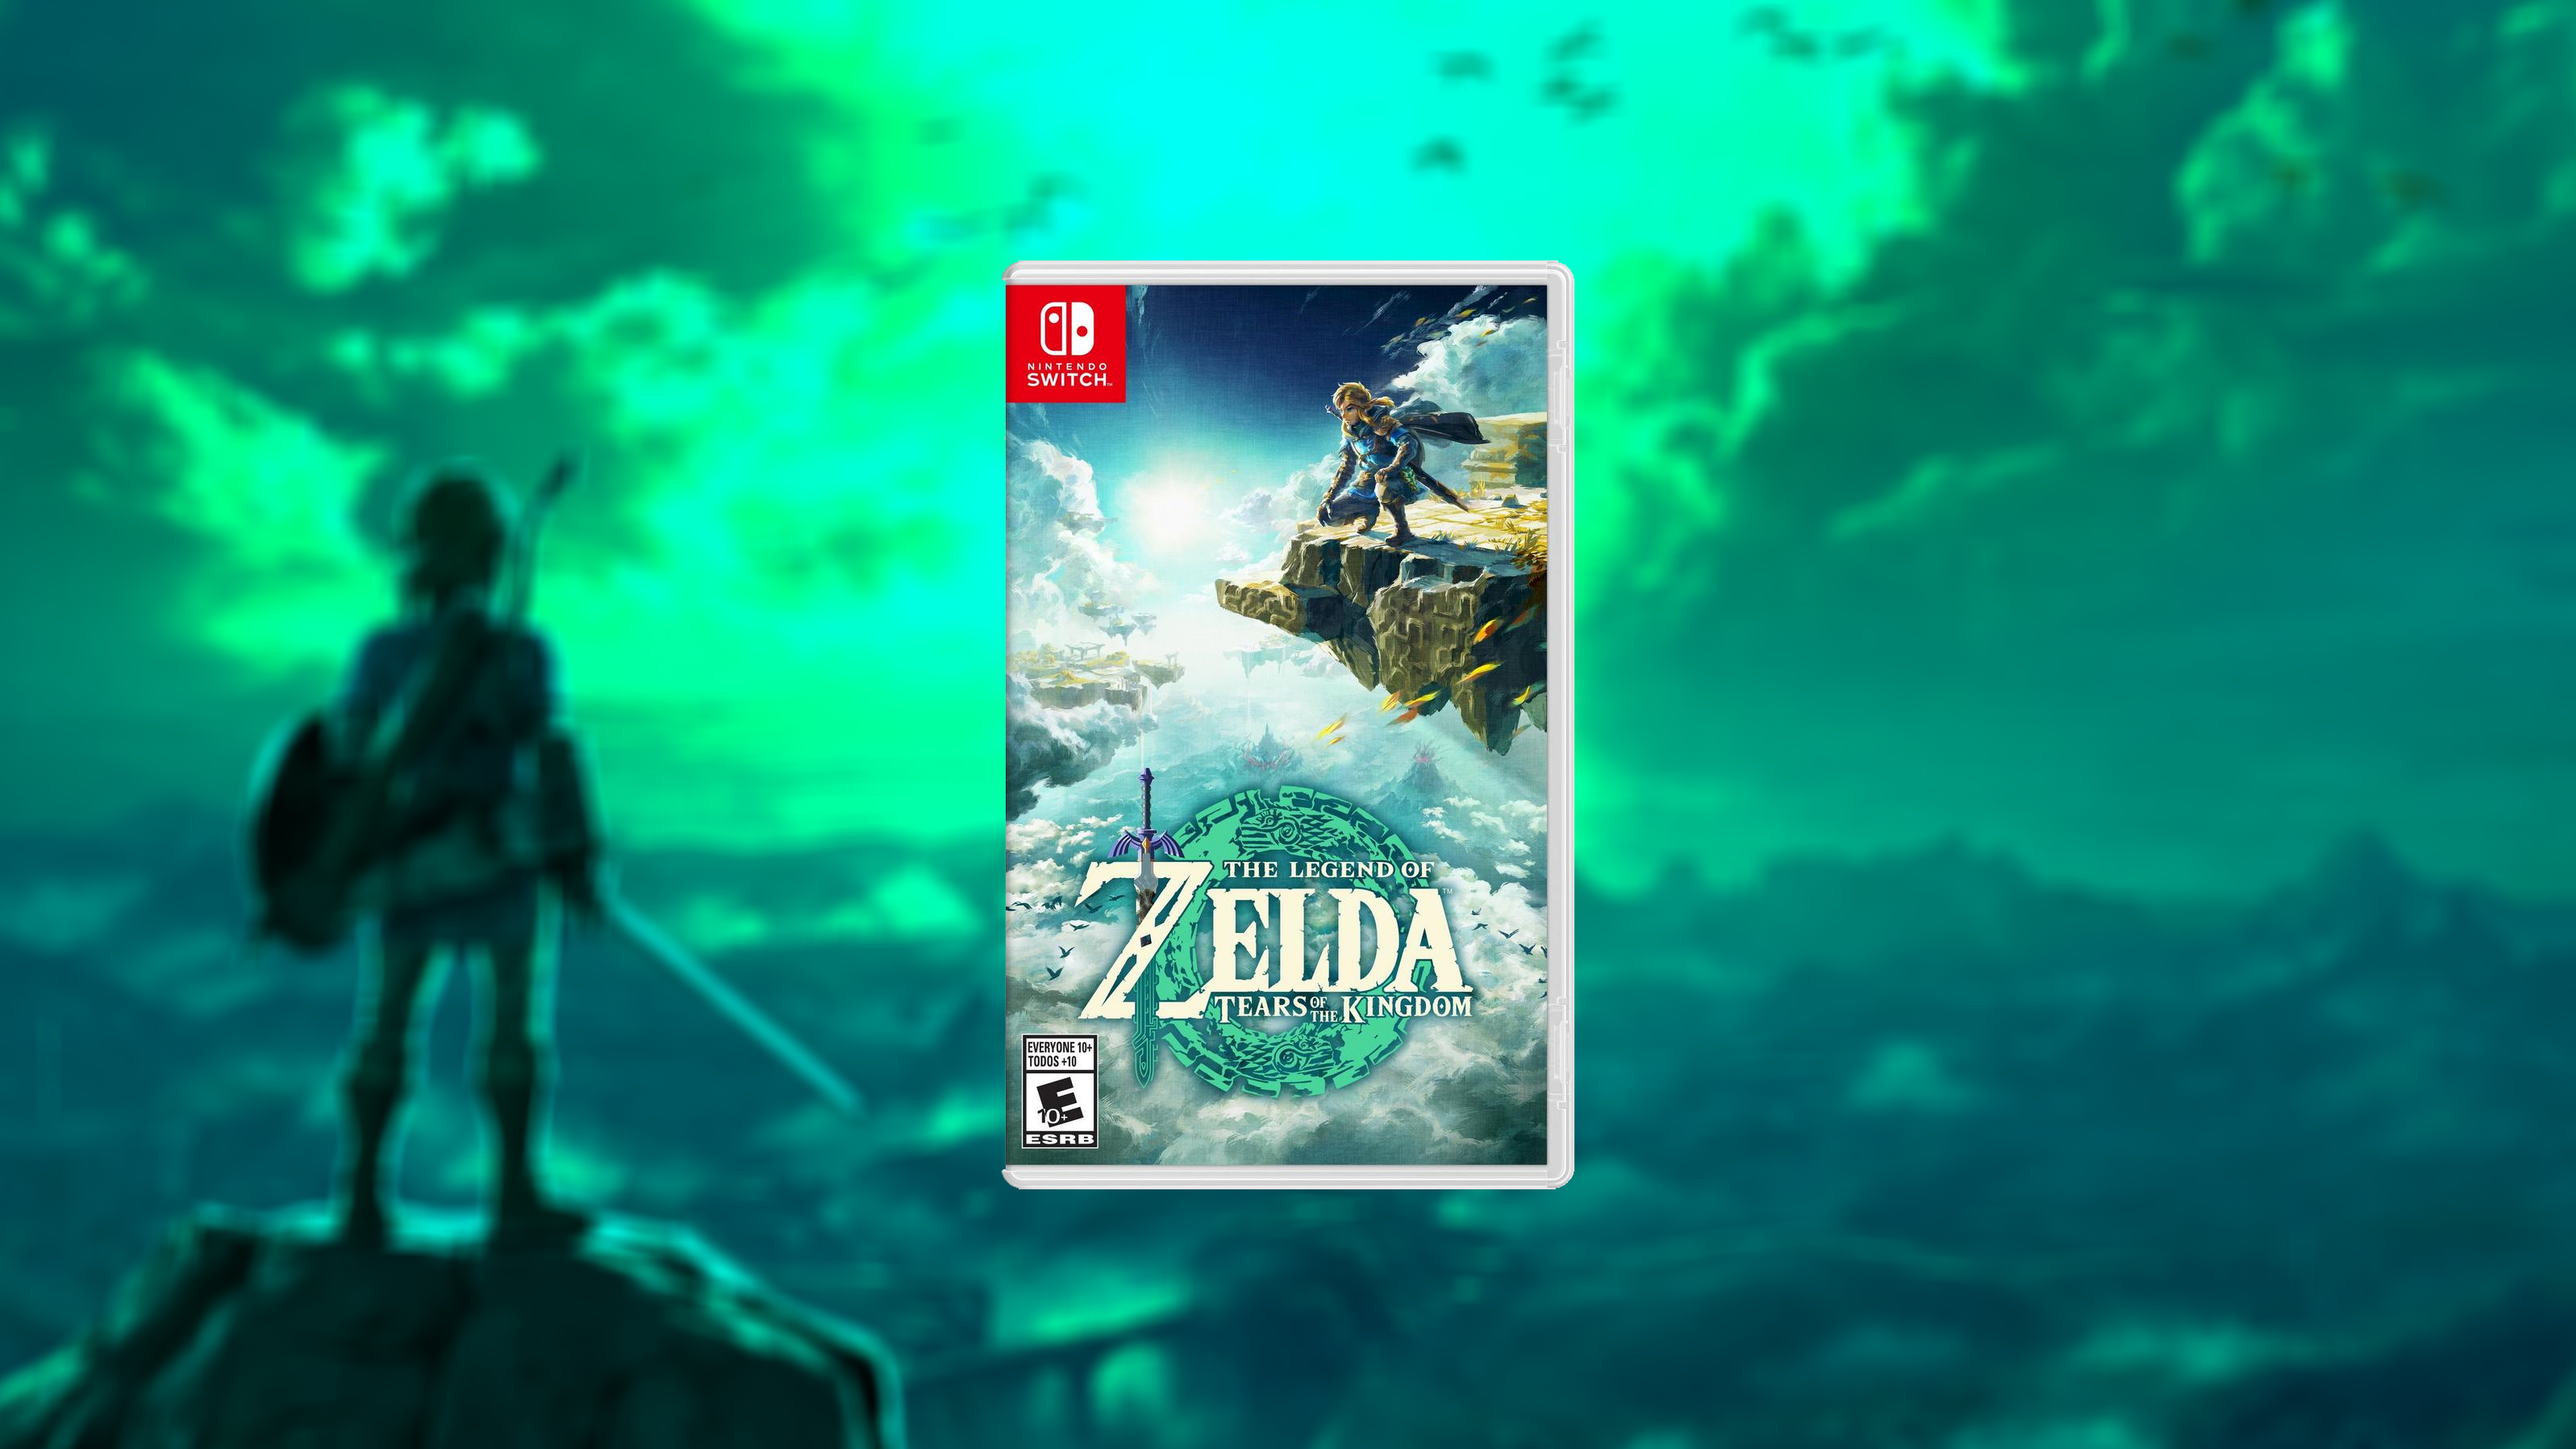 A graphic showing the box art for The Legend of Zelda Tears of the Kingdom set against a light green backdrop. The background art is from The Legend of Zelda Breath of the Wild.